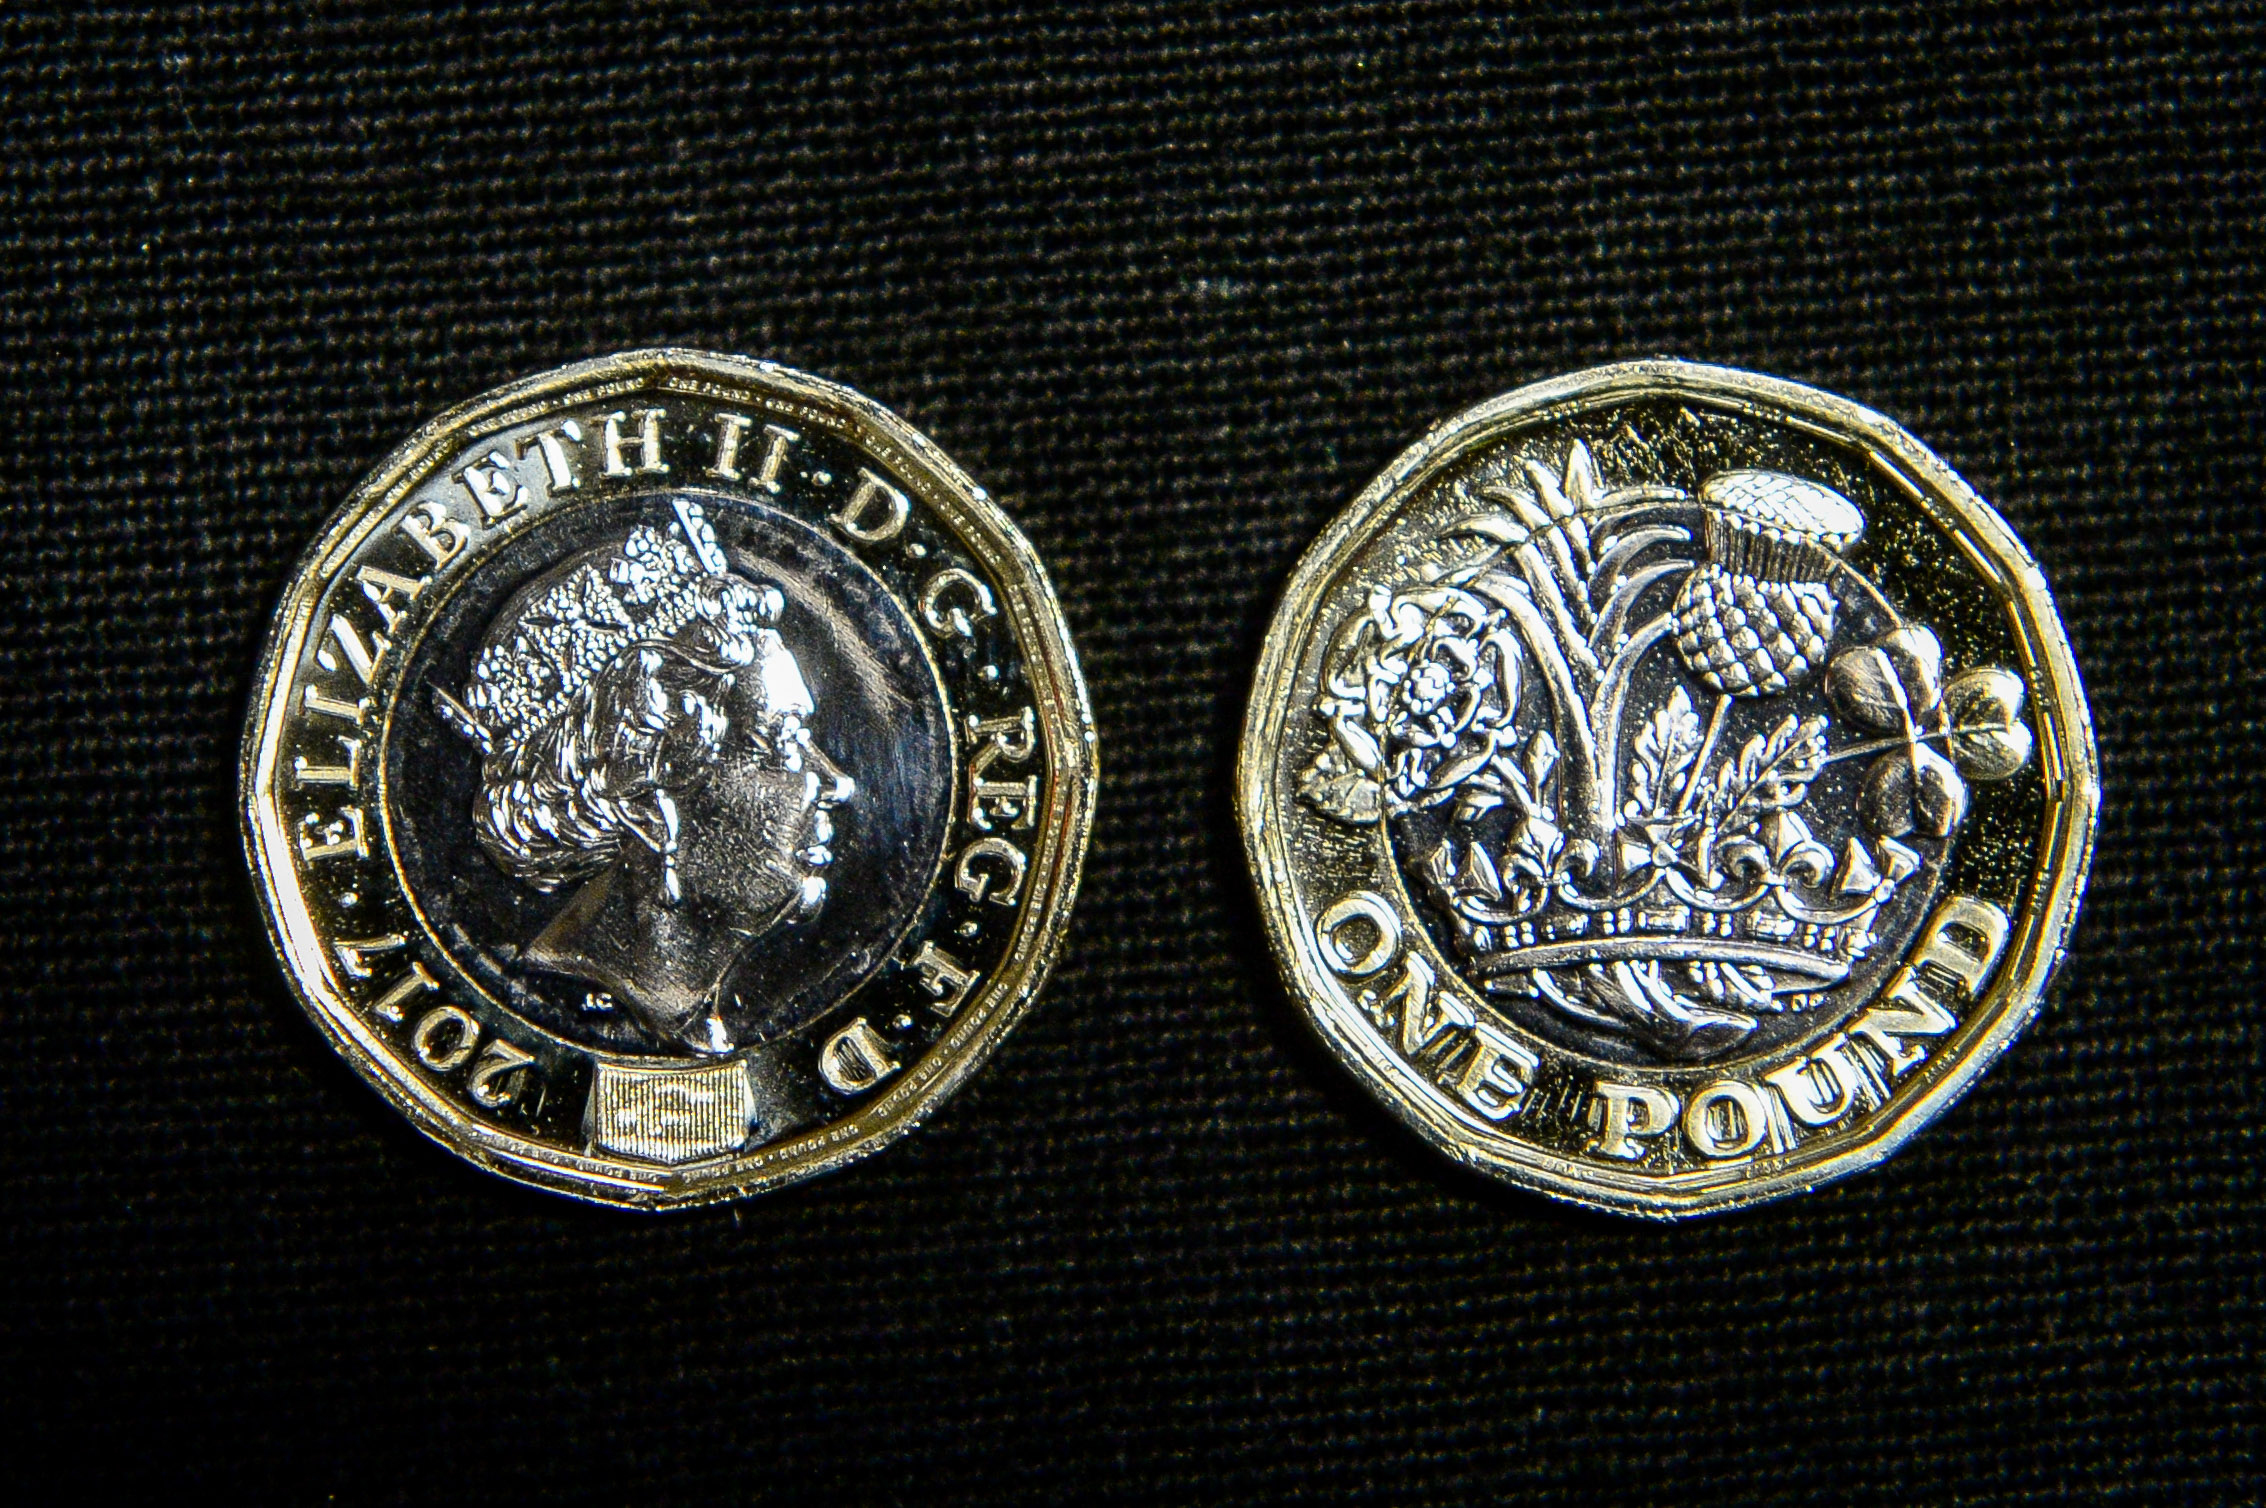 Both faces of a 12-sided one pound coin (Ben Birchall/PA Wire)